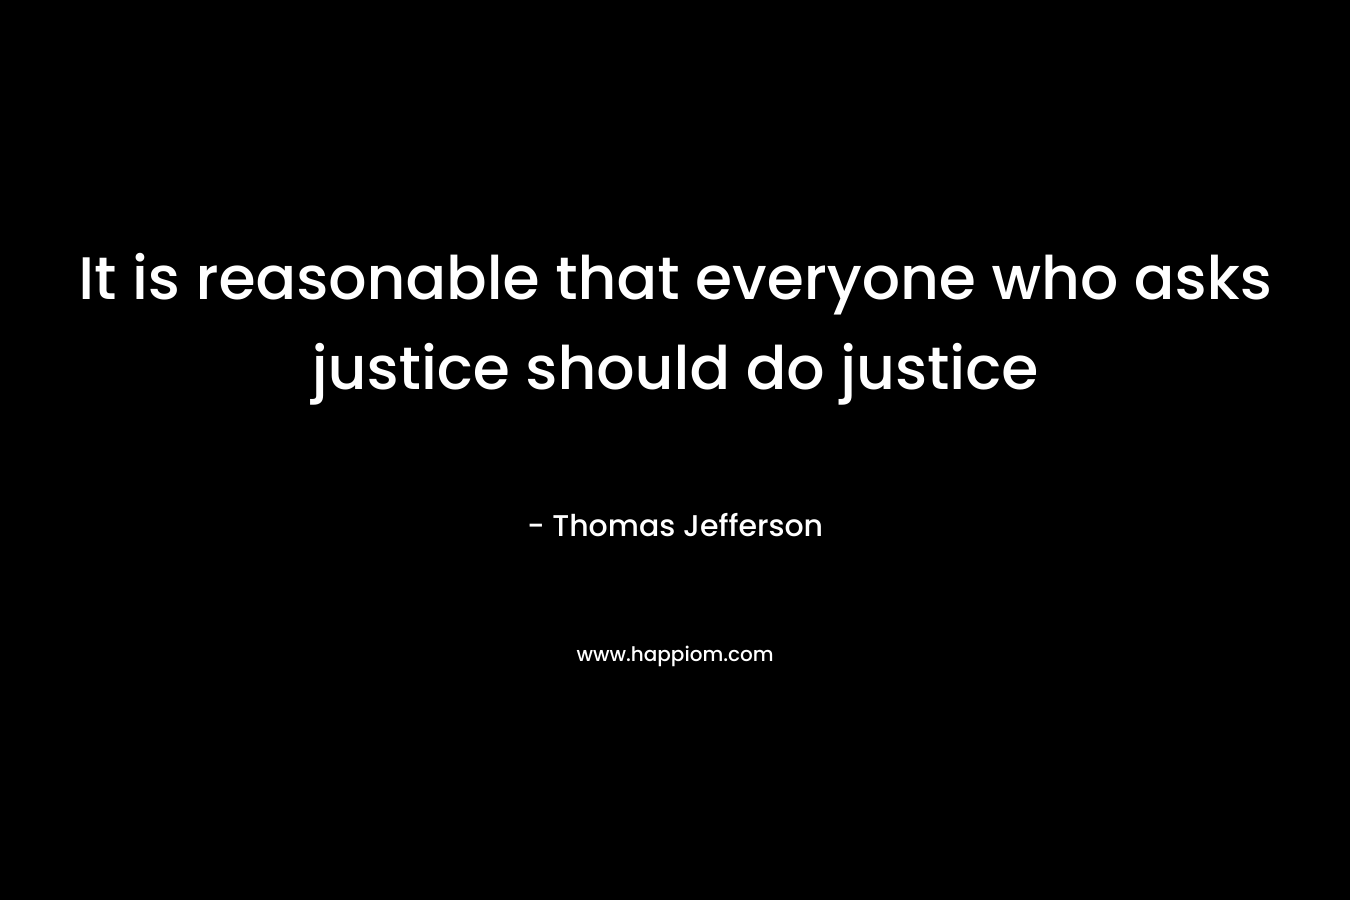 It is reasonable that everyone who asks justice should do justice